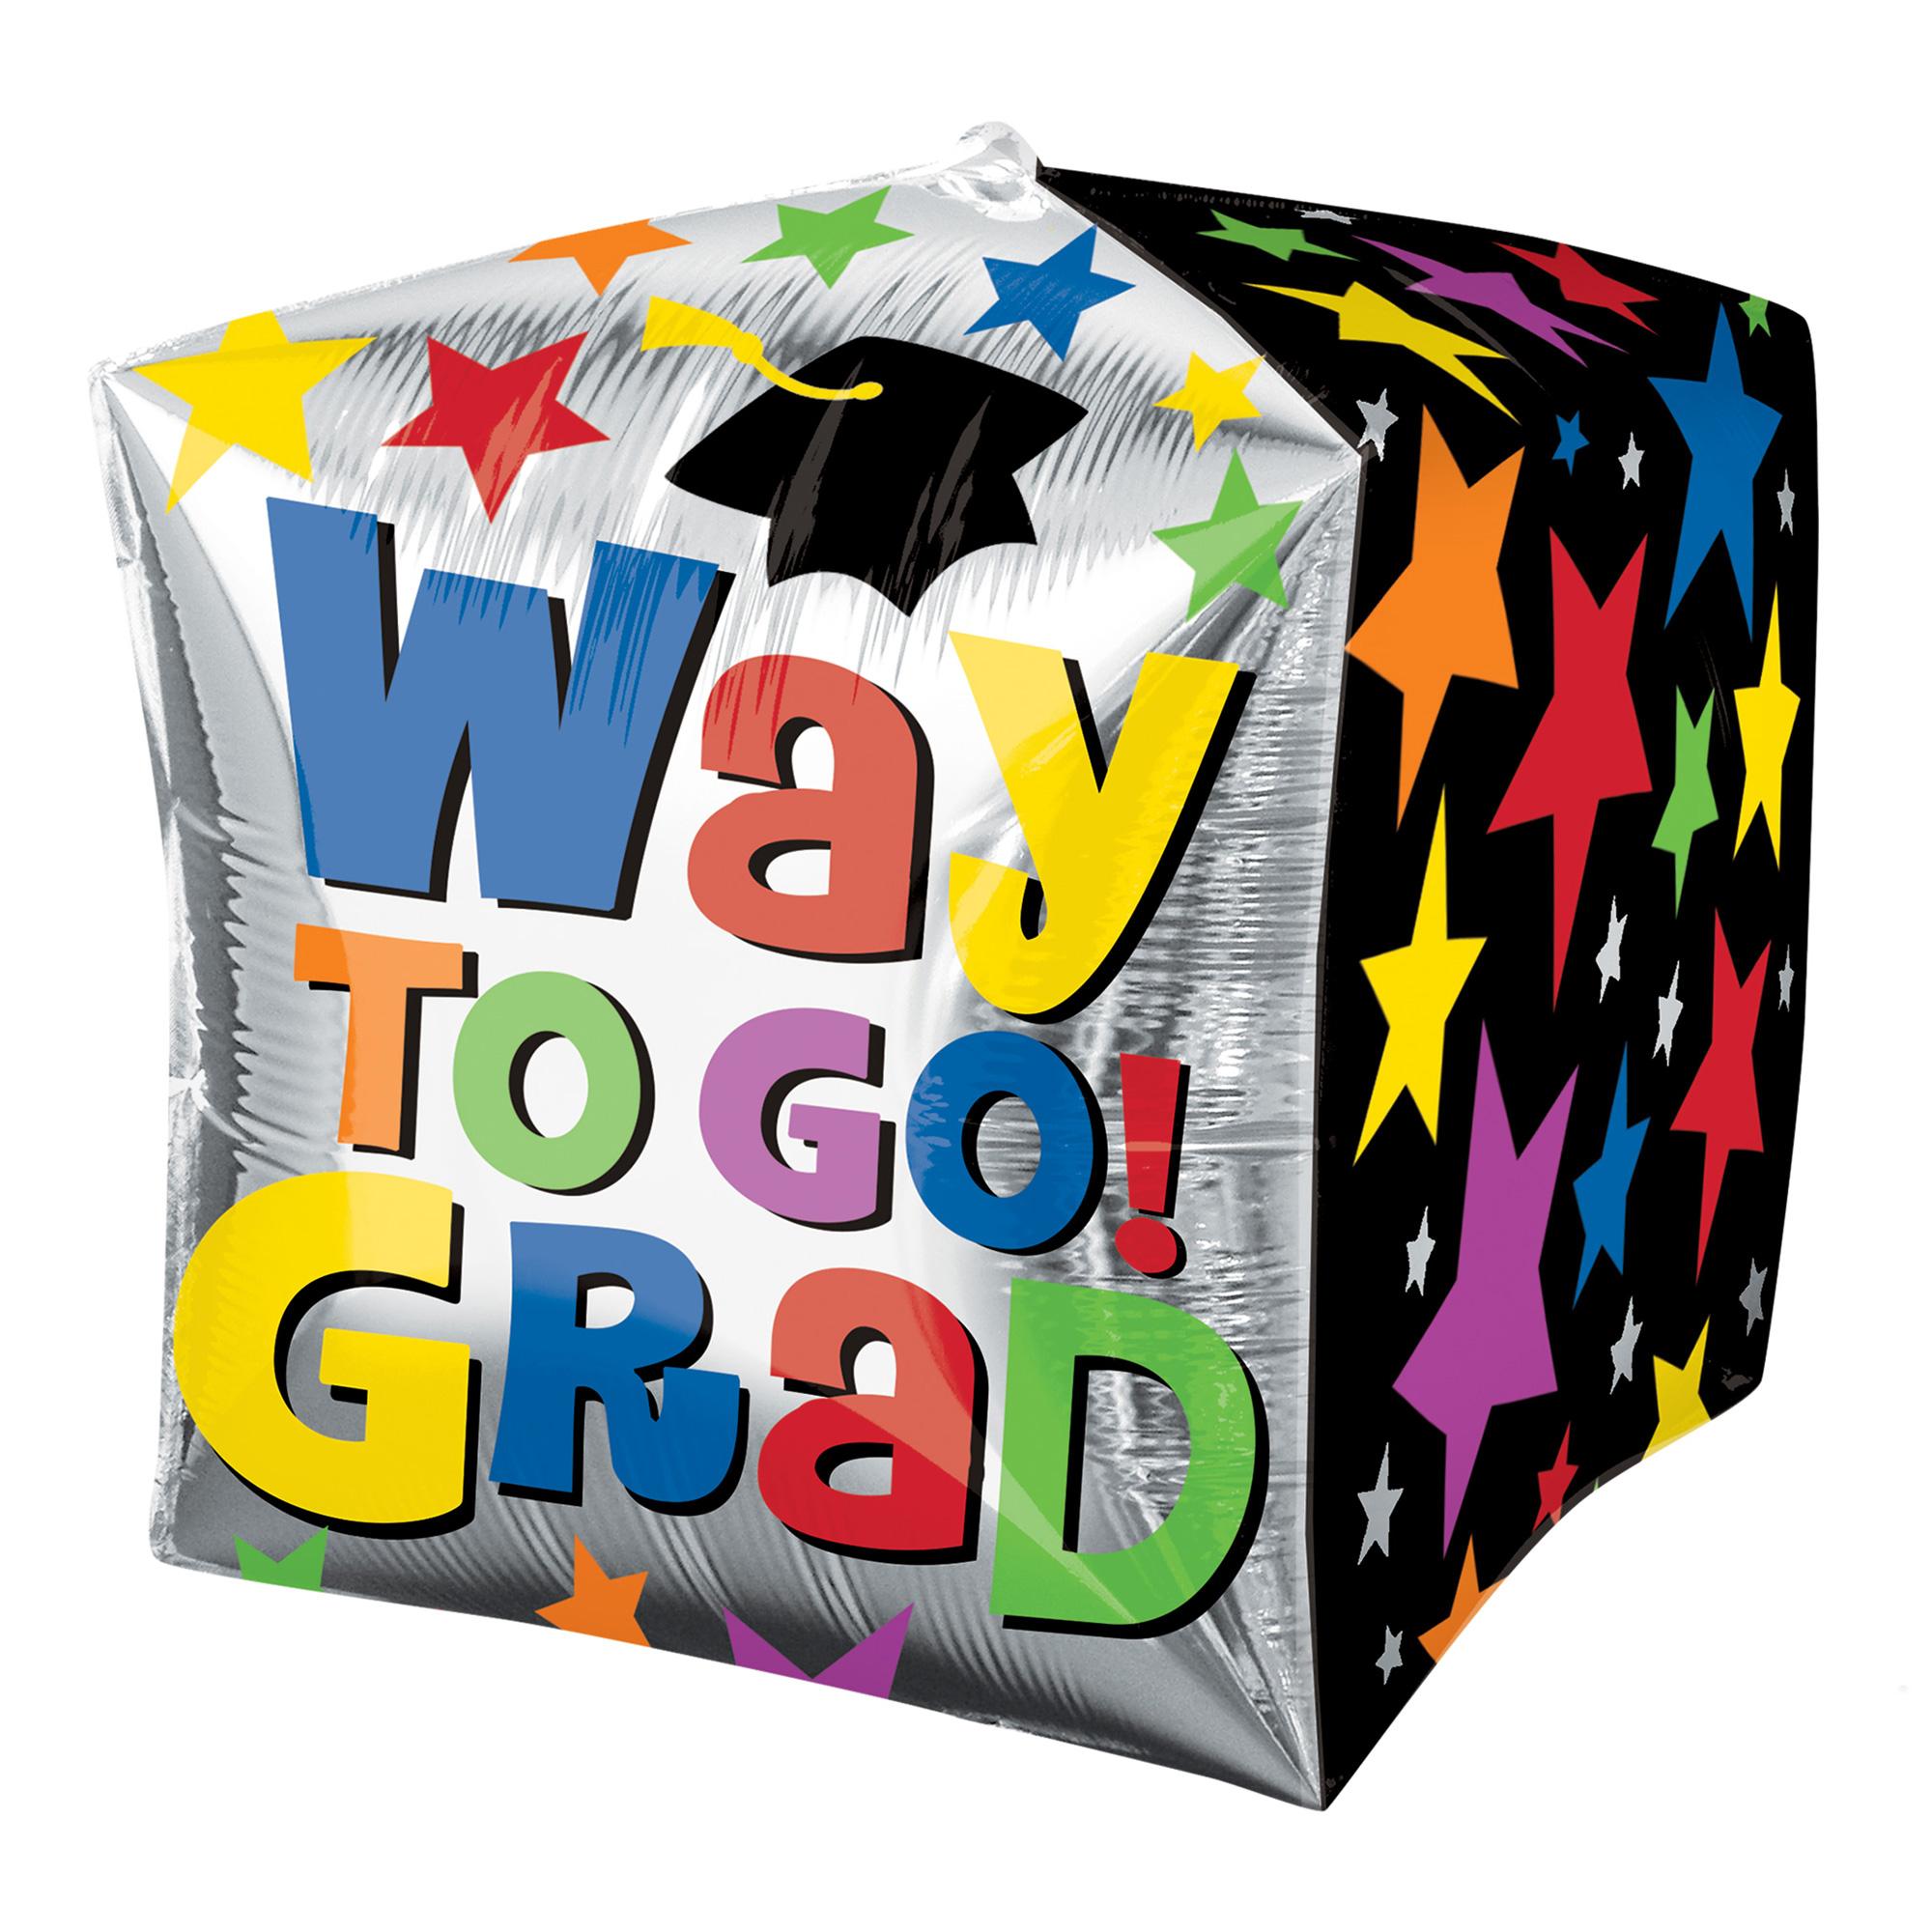 Way to Go Grad Stars Cubez Foil Balloon 15in Balloons & Streamers - Party Centre